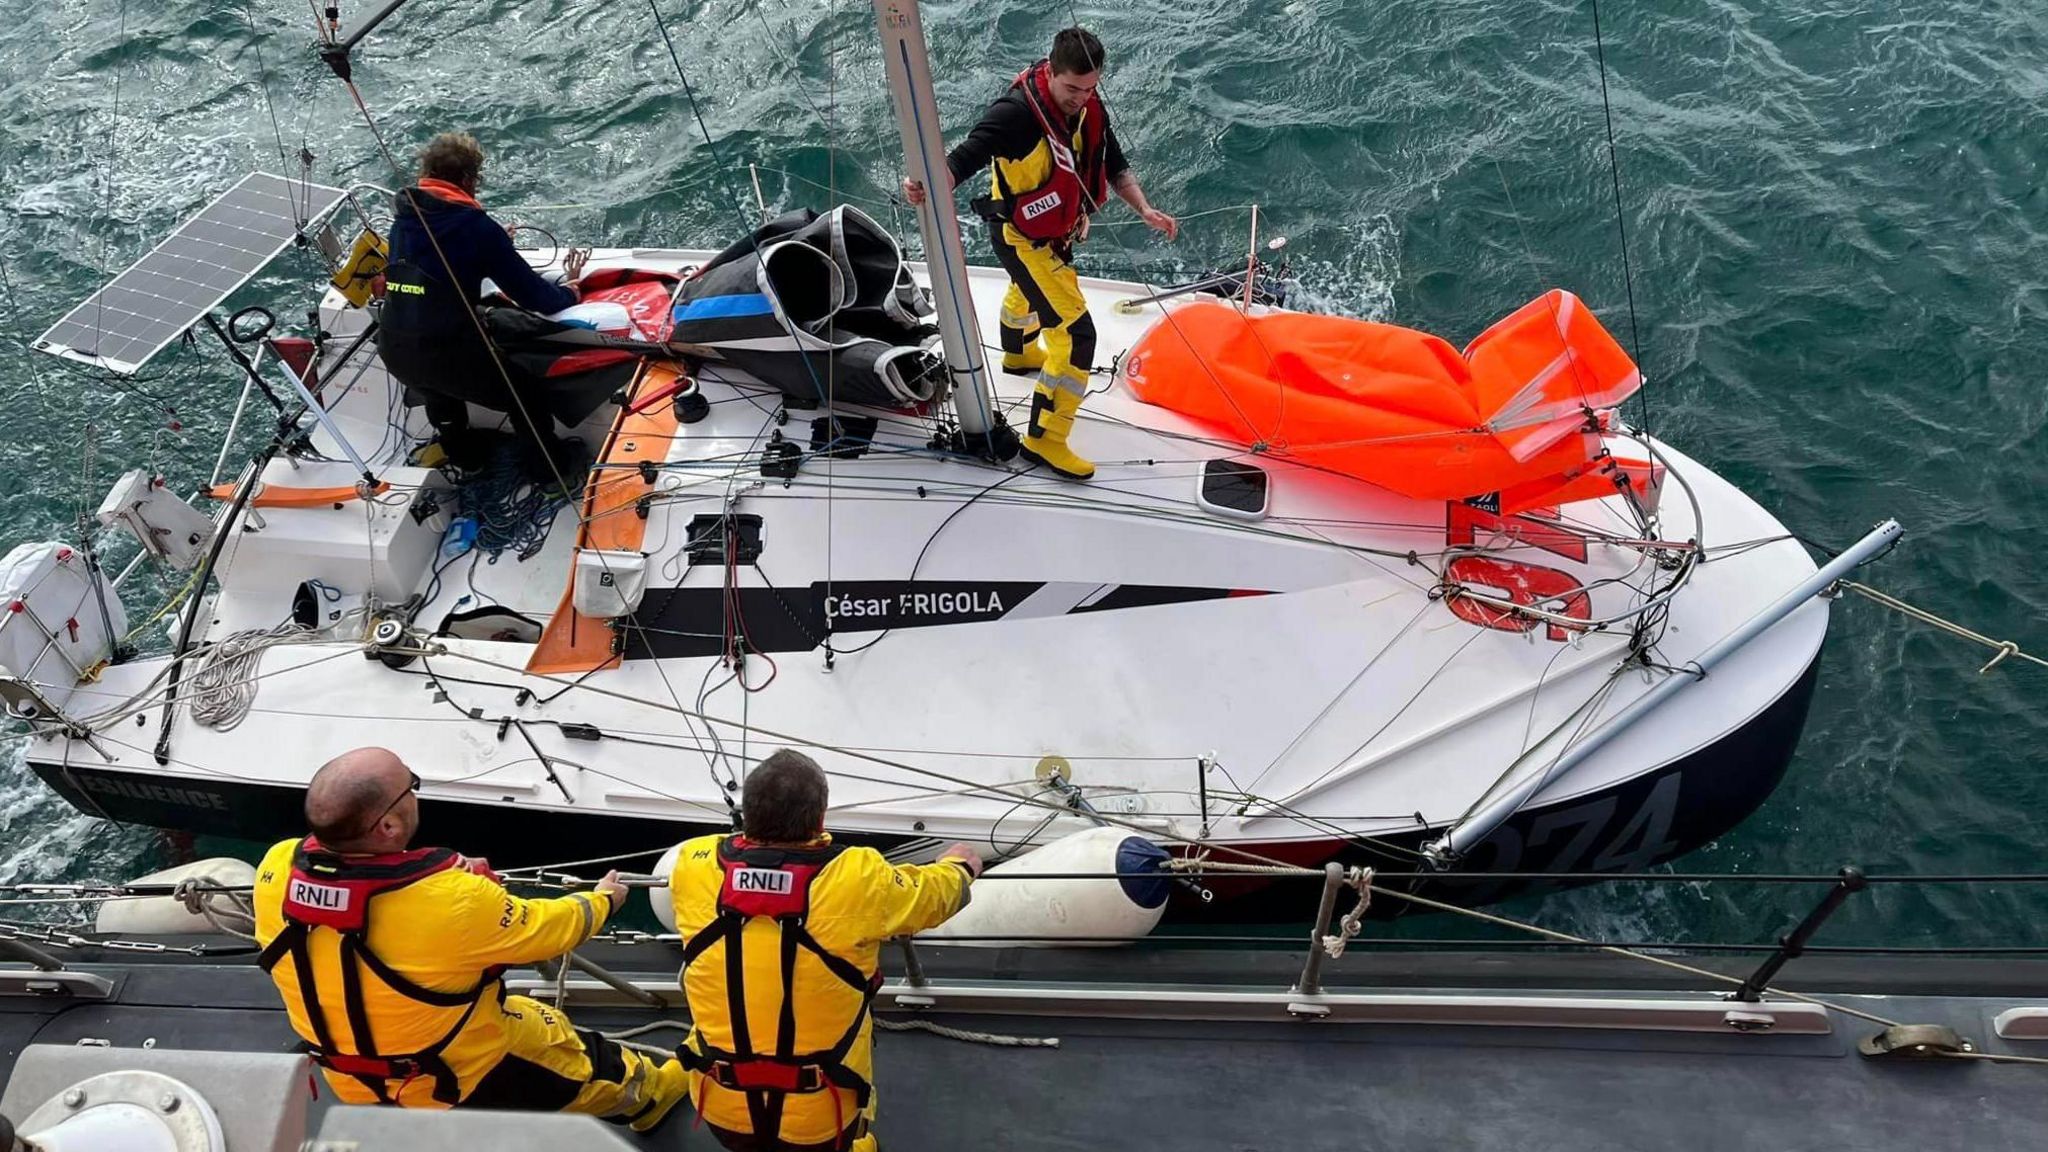 The RNLI crew helping the sailor on the yacht